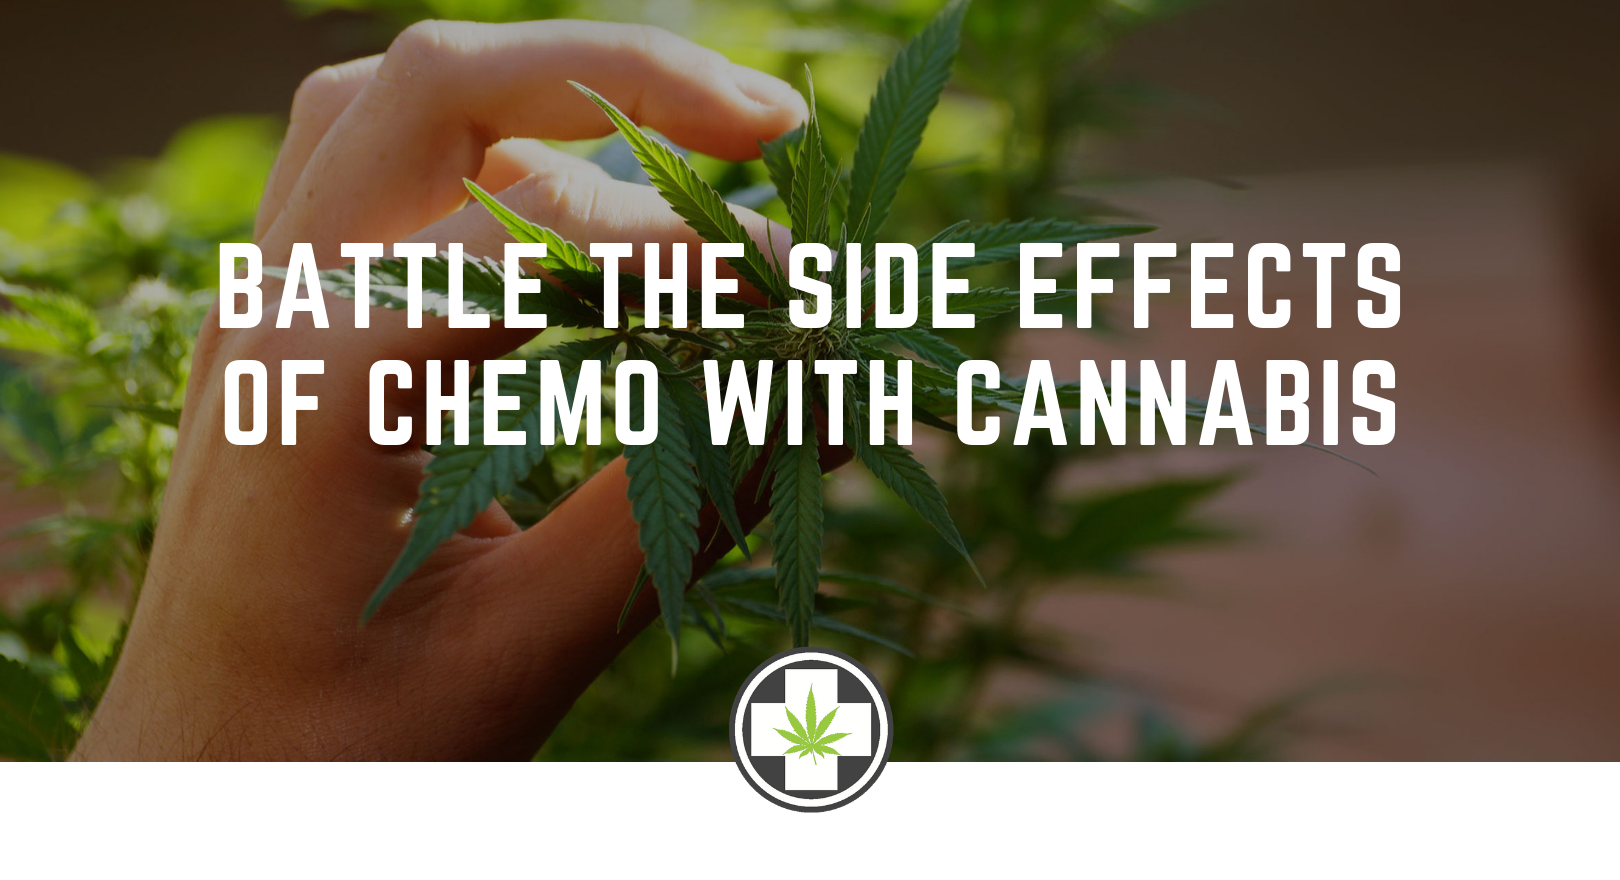 Battle The Side Effects of Chemo With Cannabis